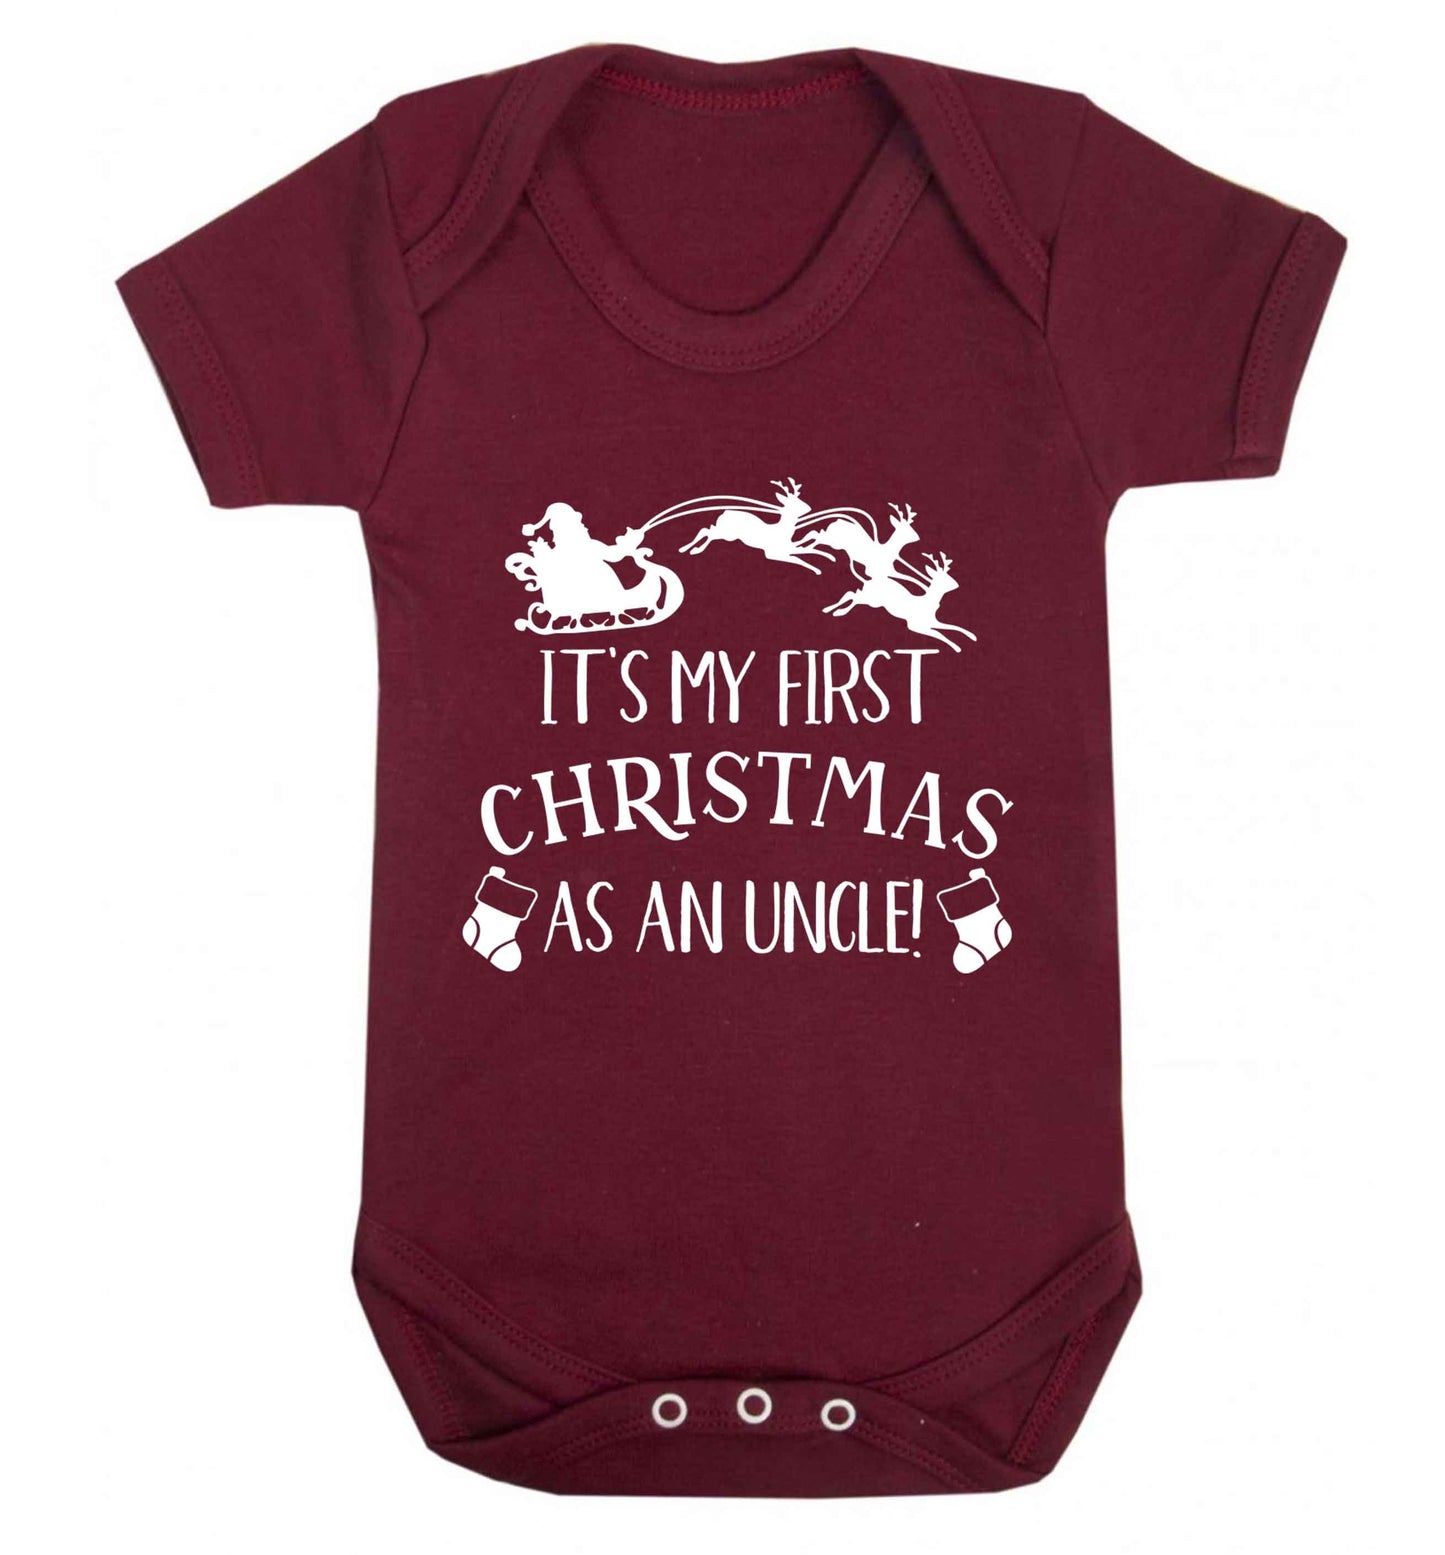 It's my first Christmas as an uncle! Baby Vest maroon 18-24 months